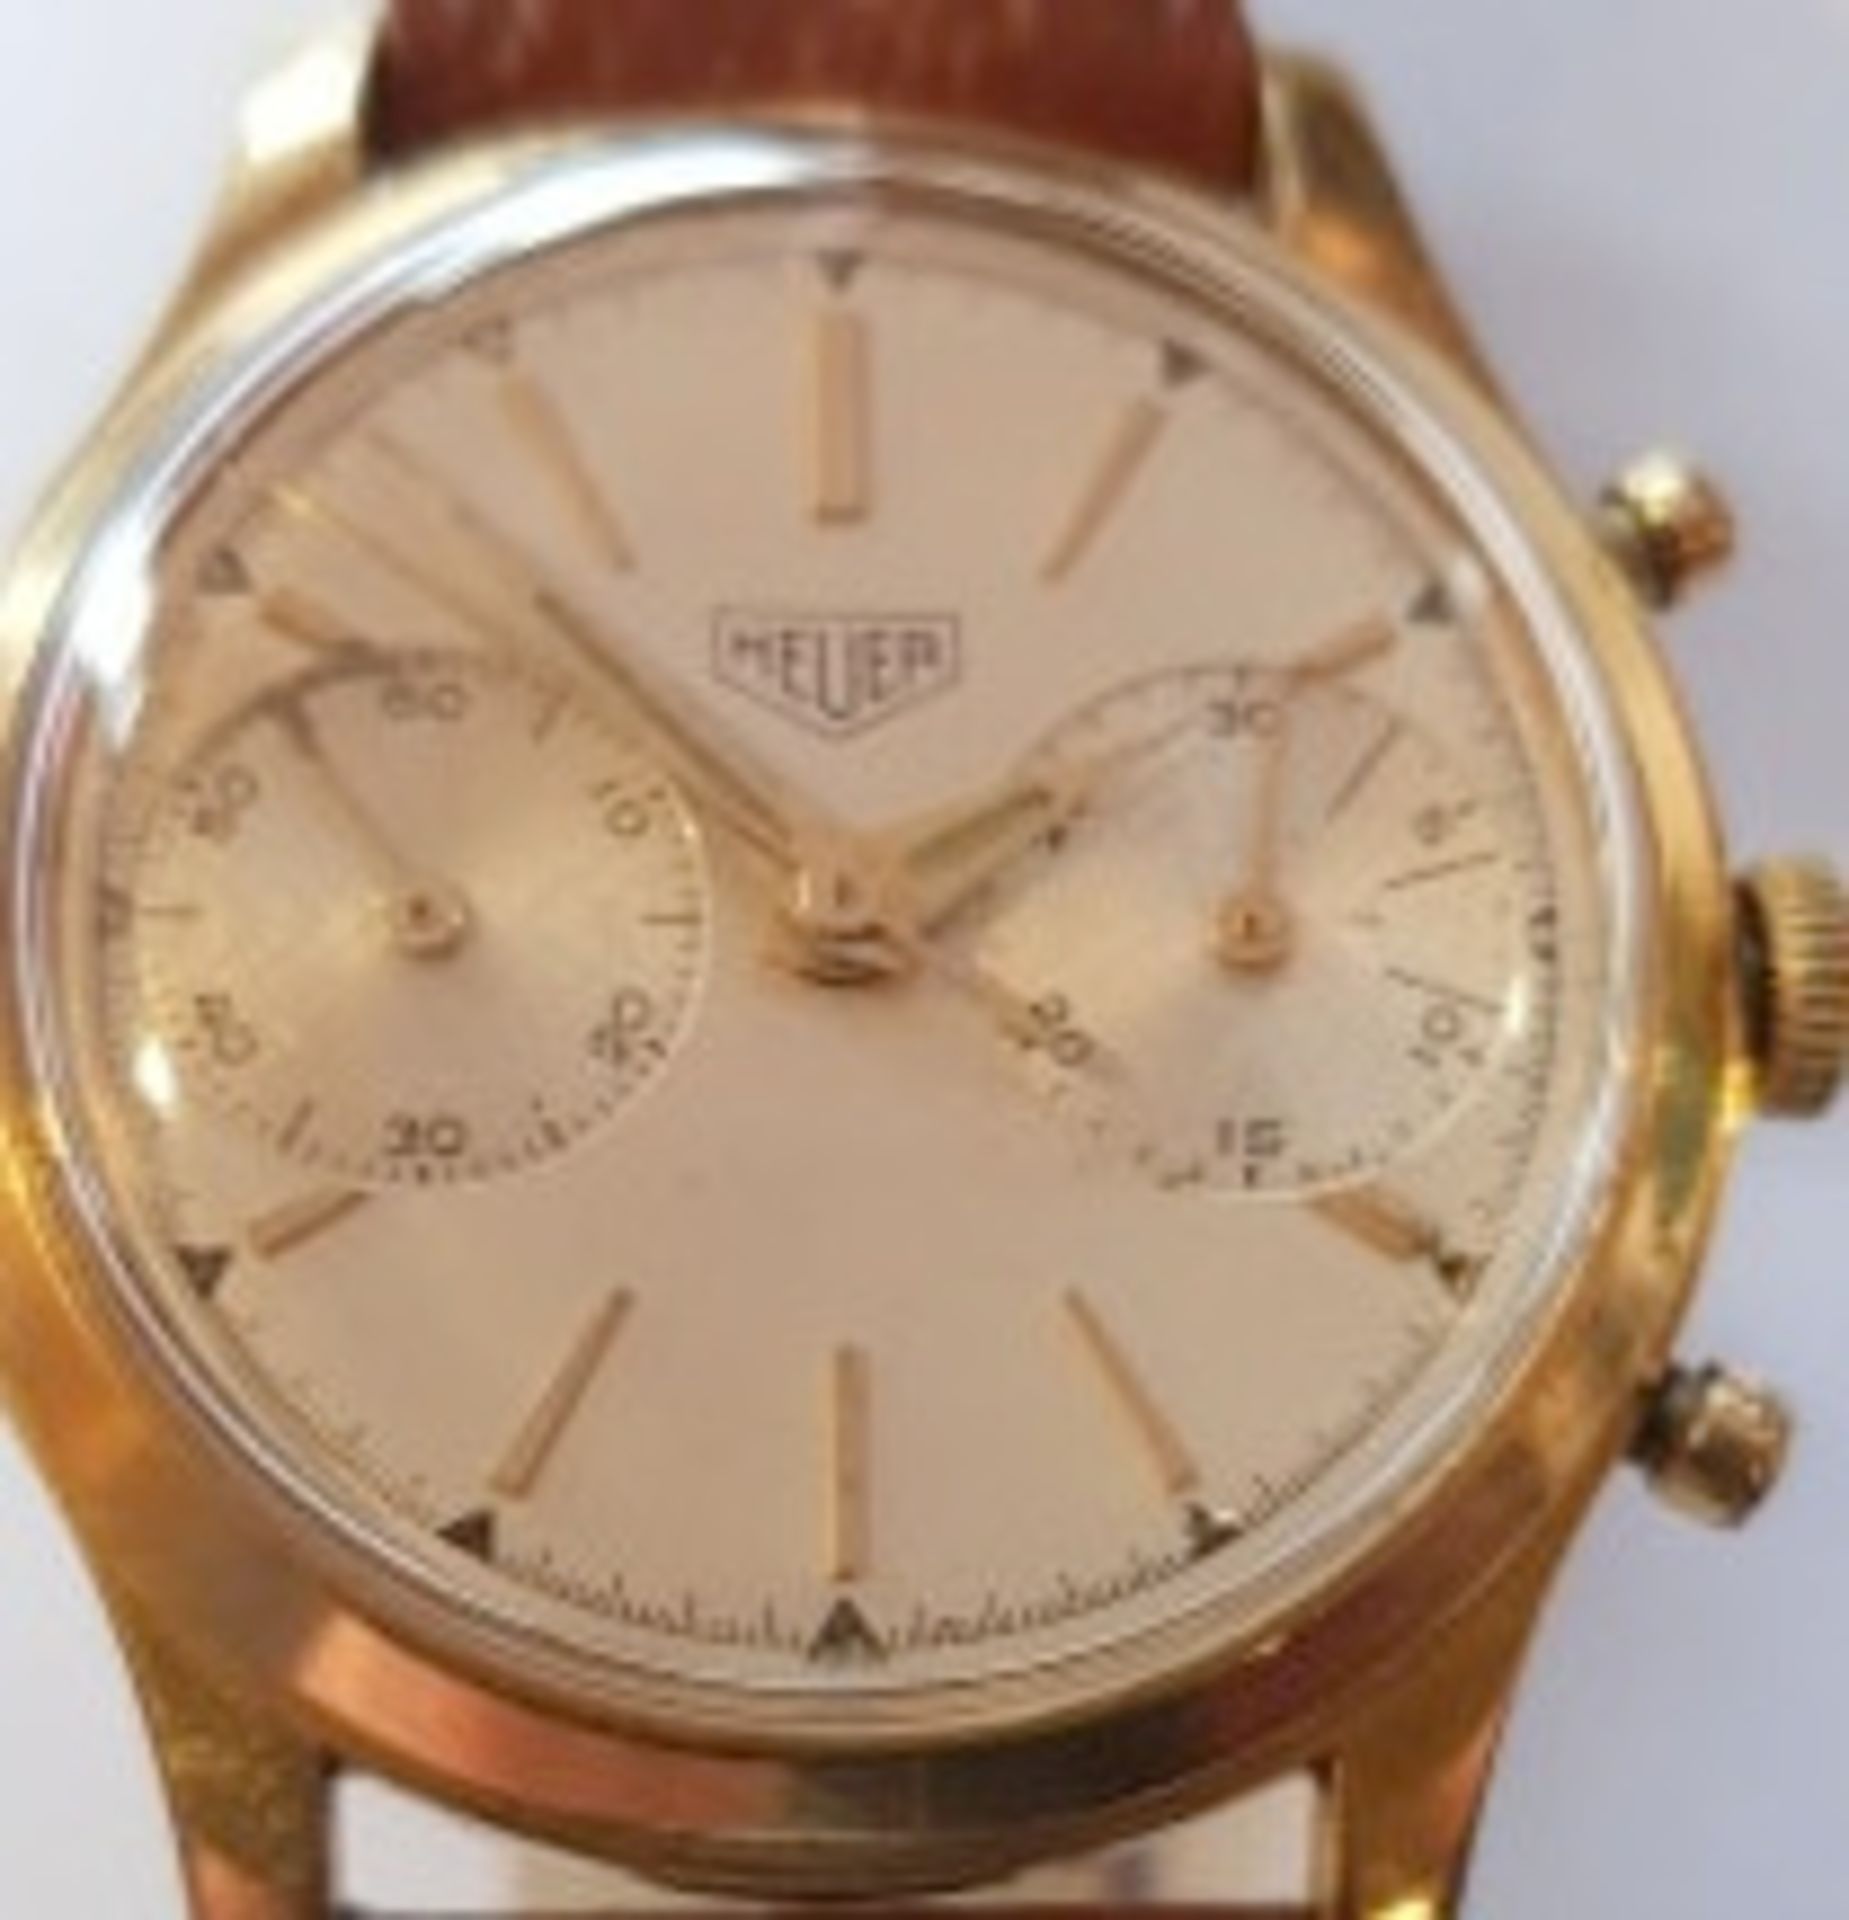 Collectable Heuer Vintage 1960/70s Manual Wind Chronograph Watch - Image 3 of 6